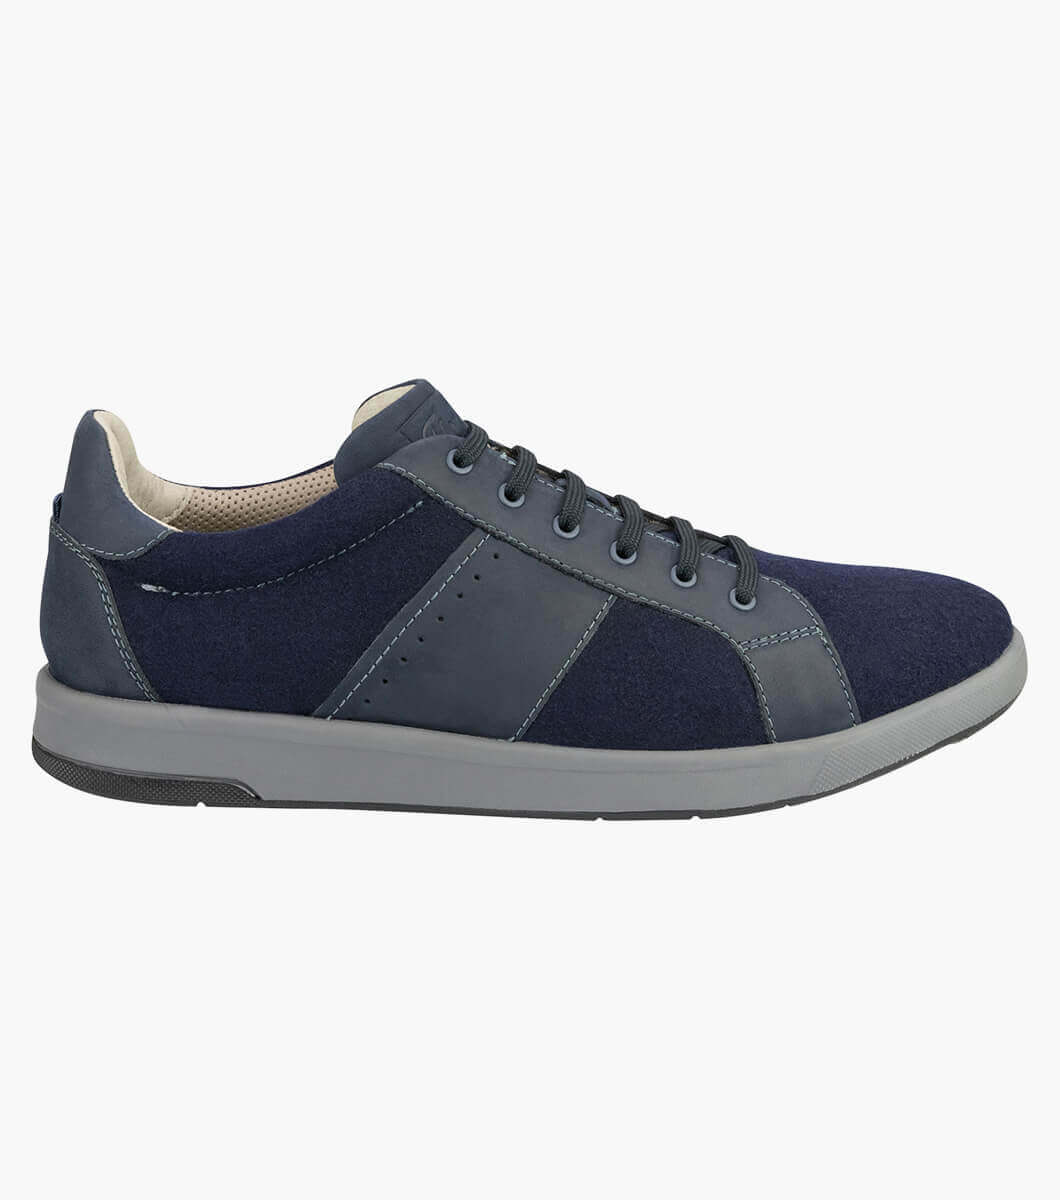 Crossover Wool Lace To Toe Sneaker Men's Sneakers | Florsheim.com